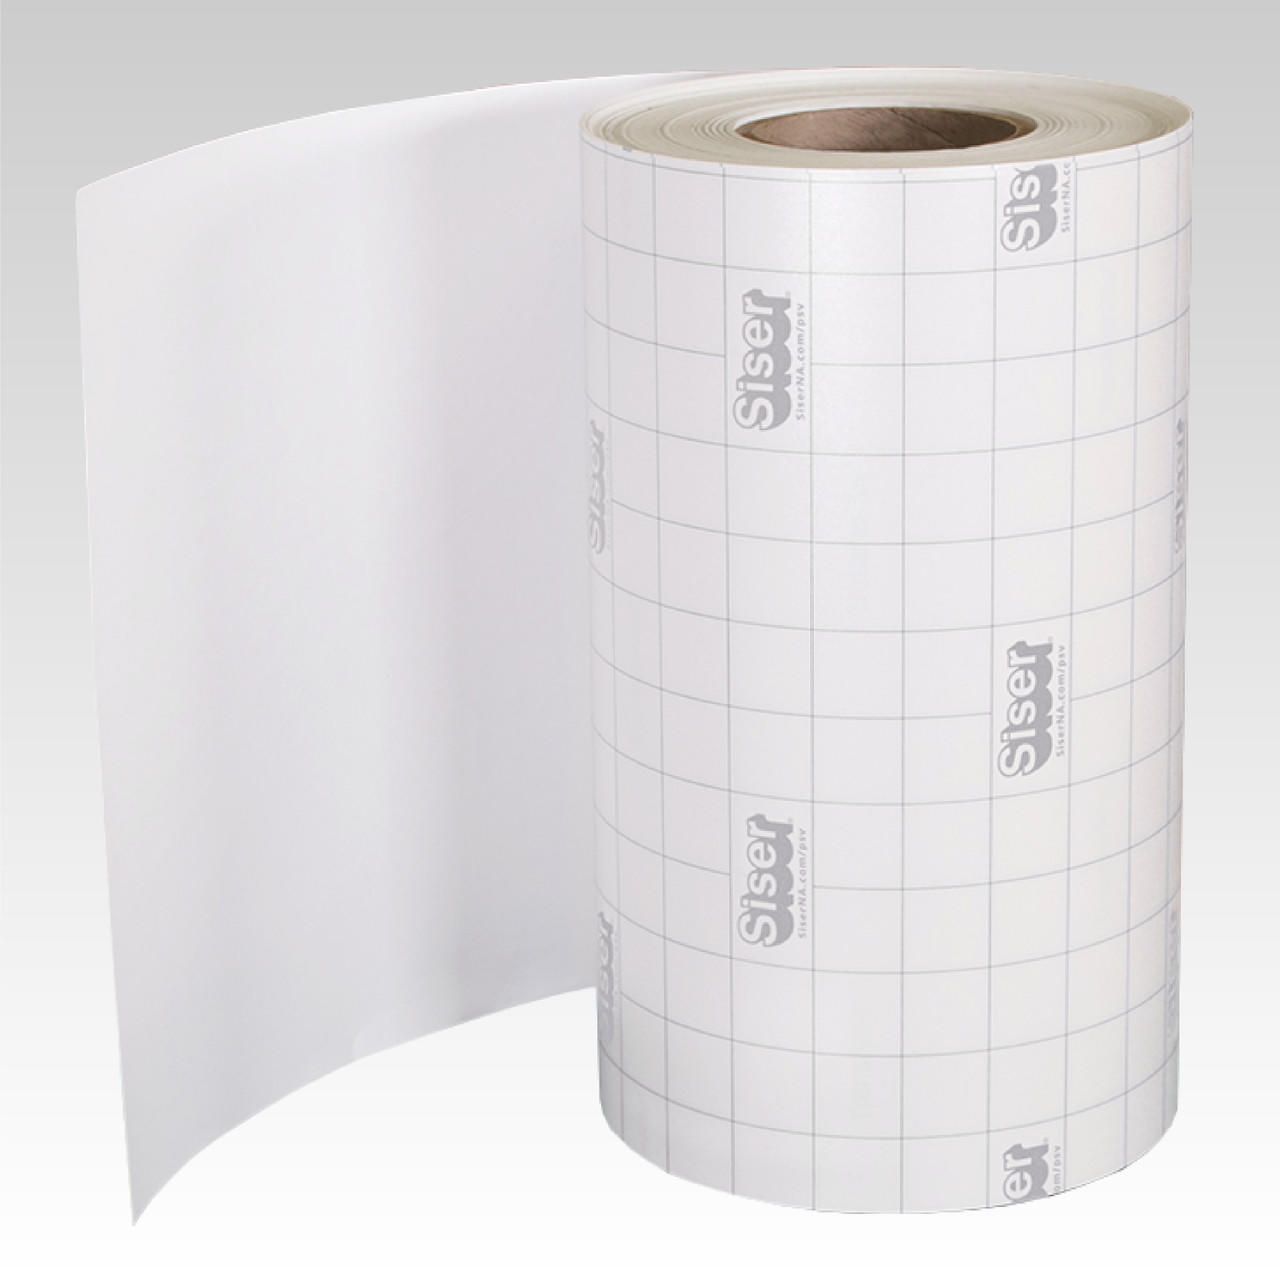 Adhesive Clear Transfer Paper Tape Sheet/Roll With Grid Lines For Vinyl  Decals